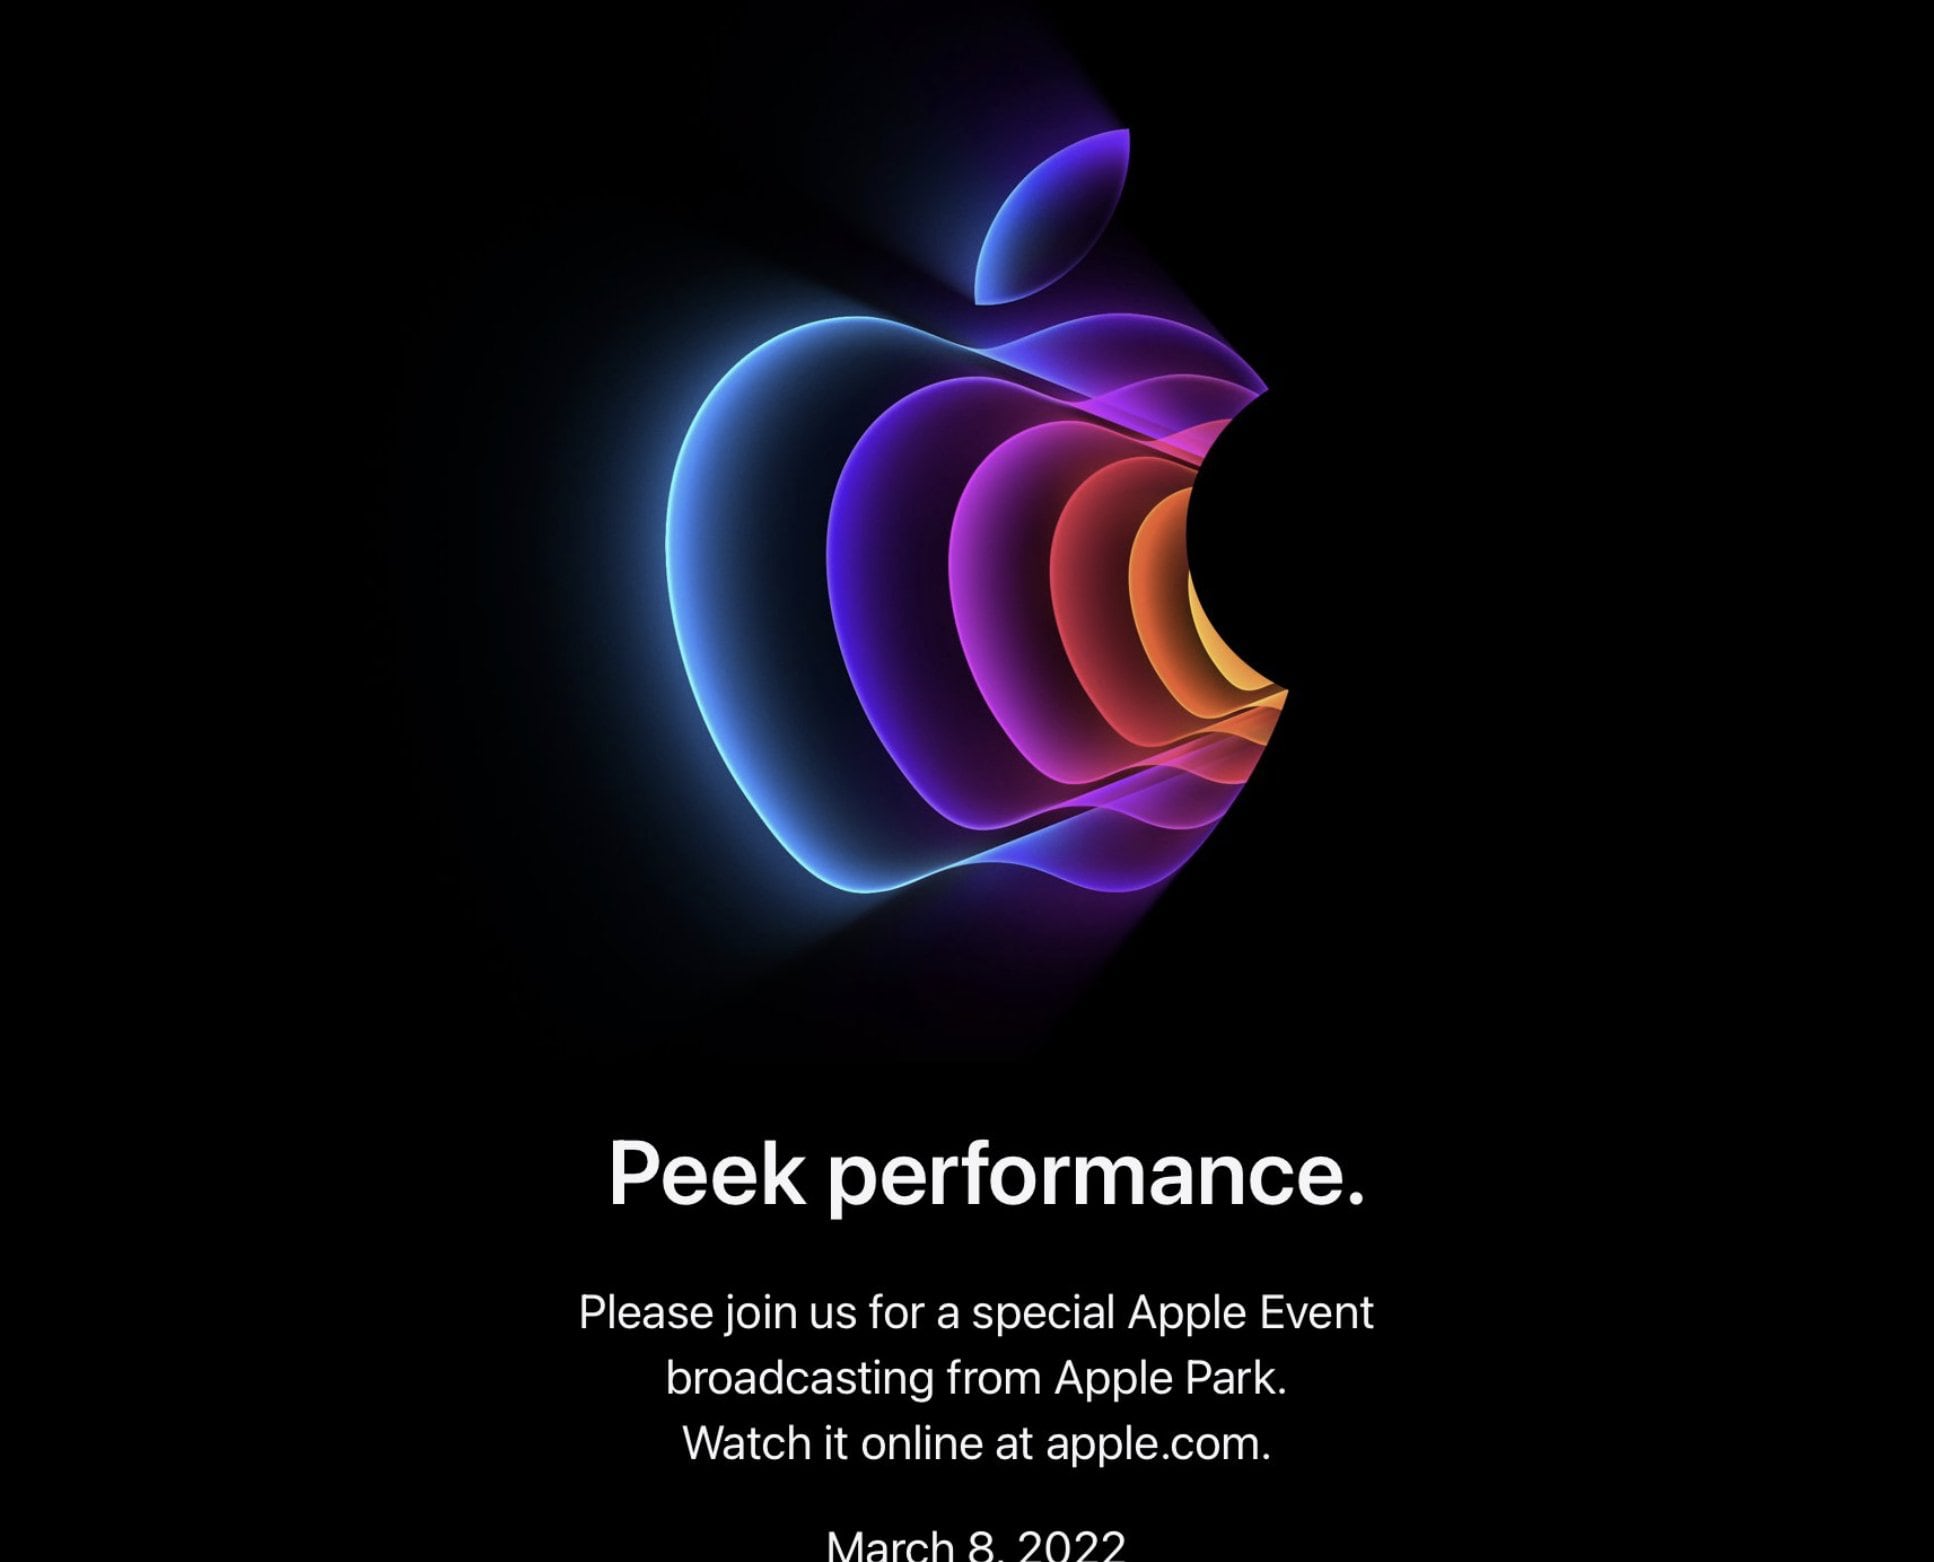 Apple Event Announced for March 8: Peek Performance